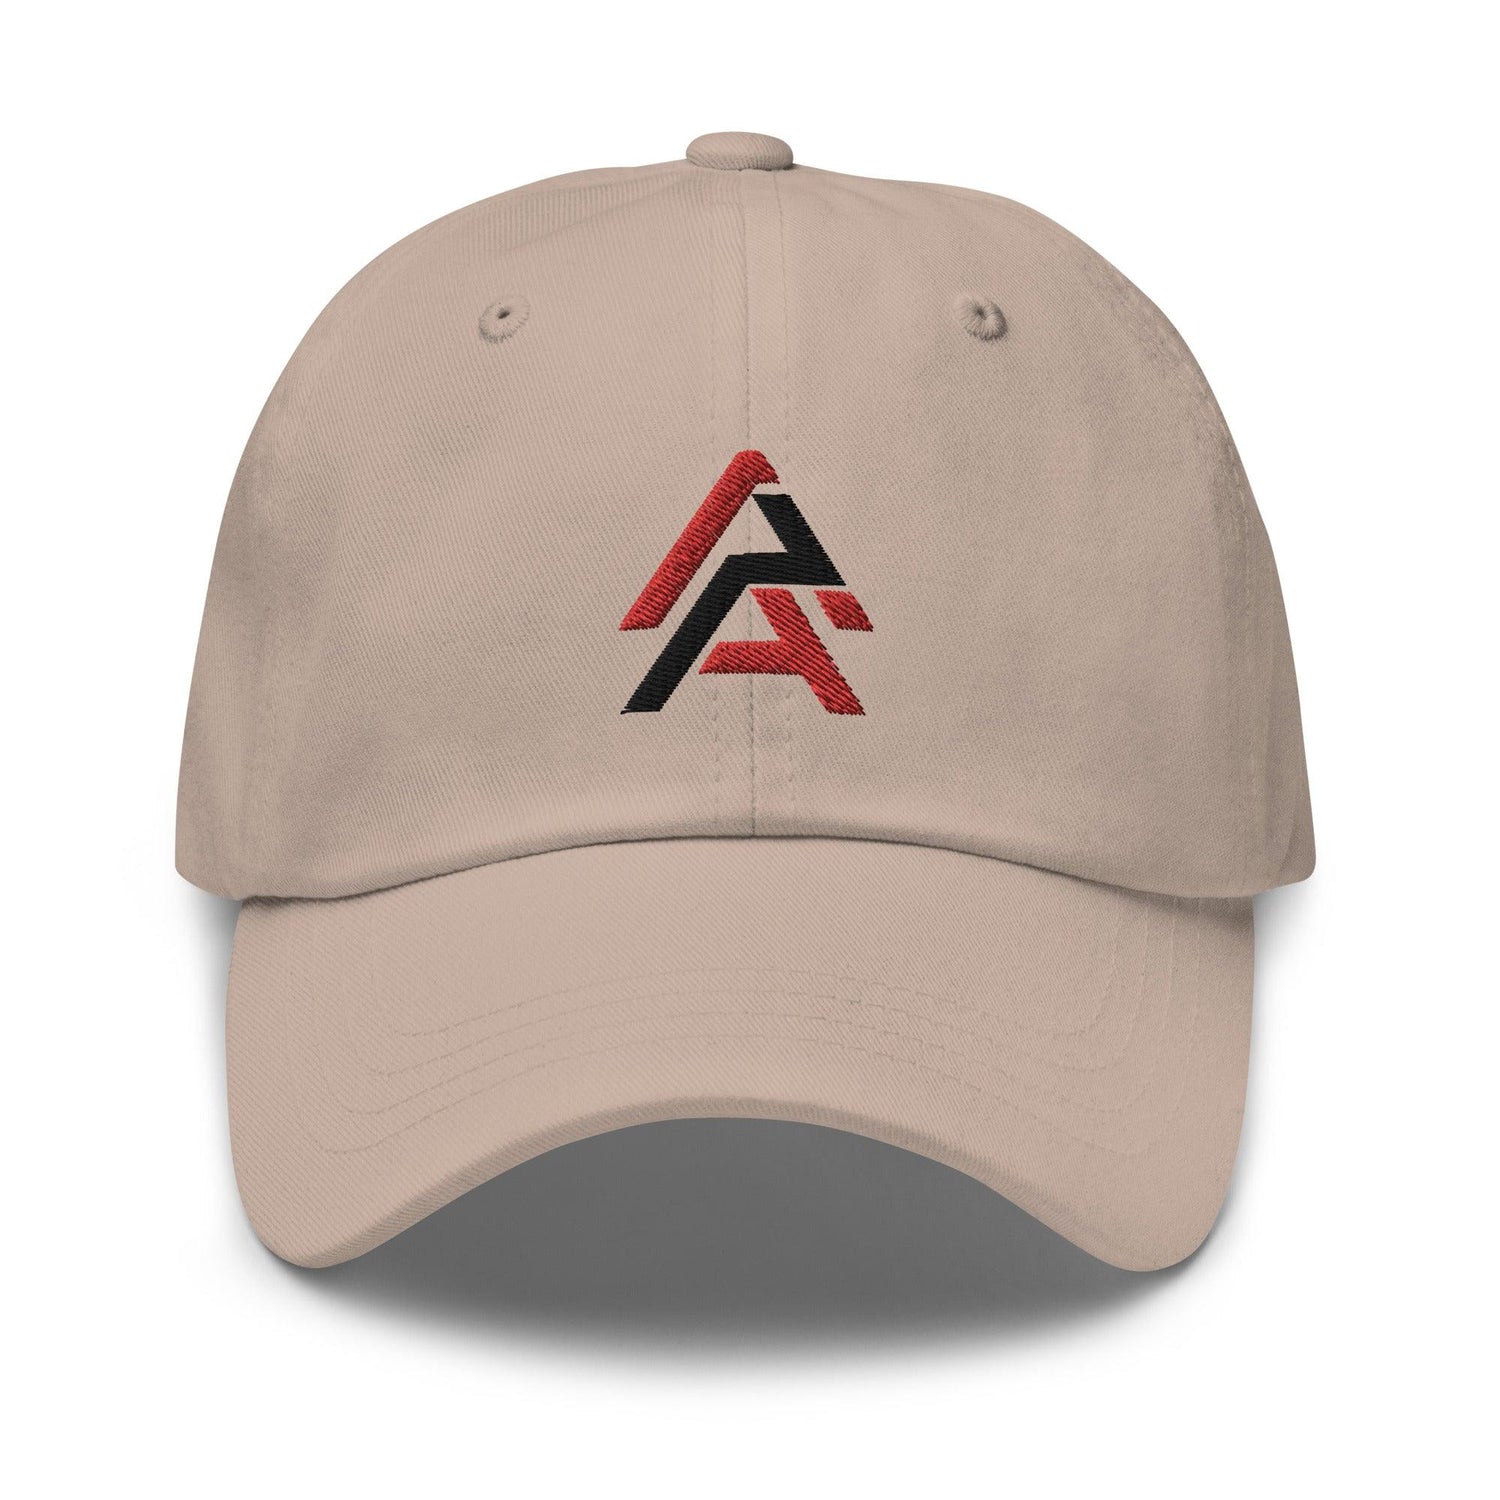 Anthony Alford “AA” hat - Fan Arch